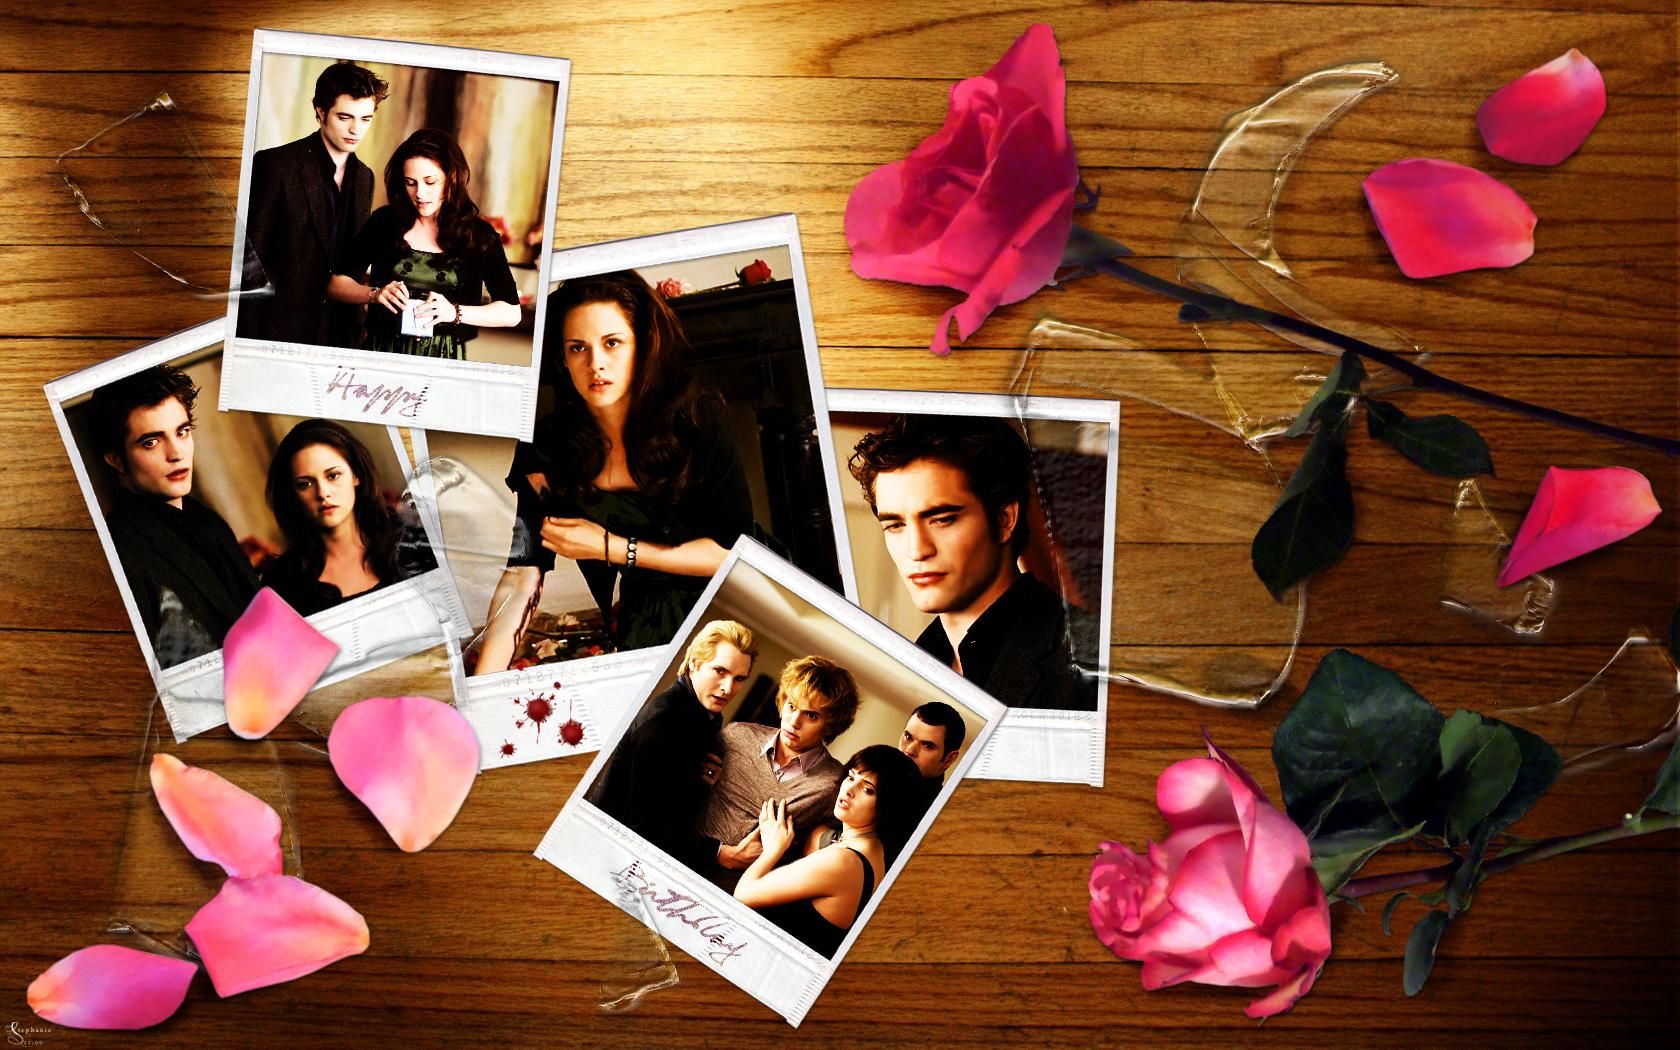 New Moon The Twilight Saga free Wallpapers 77 photos for your